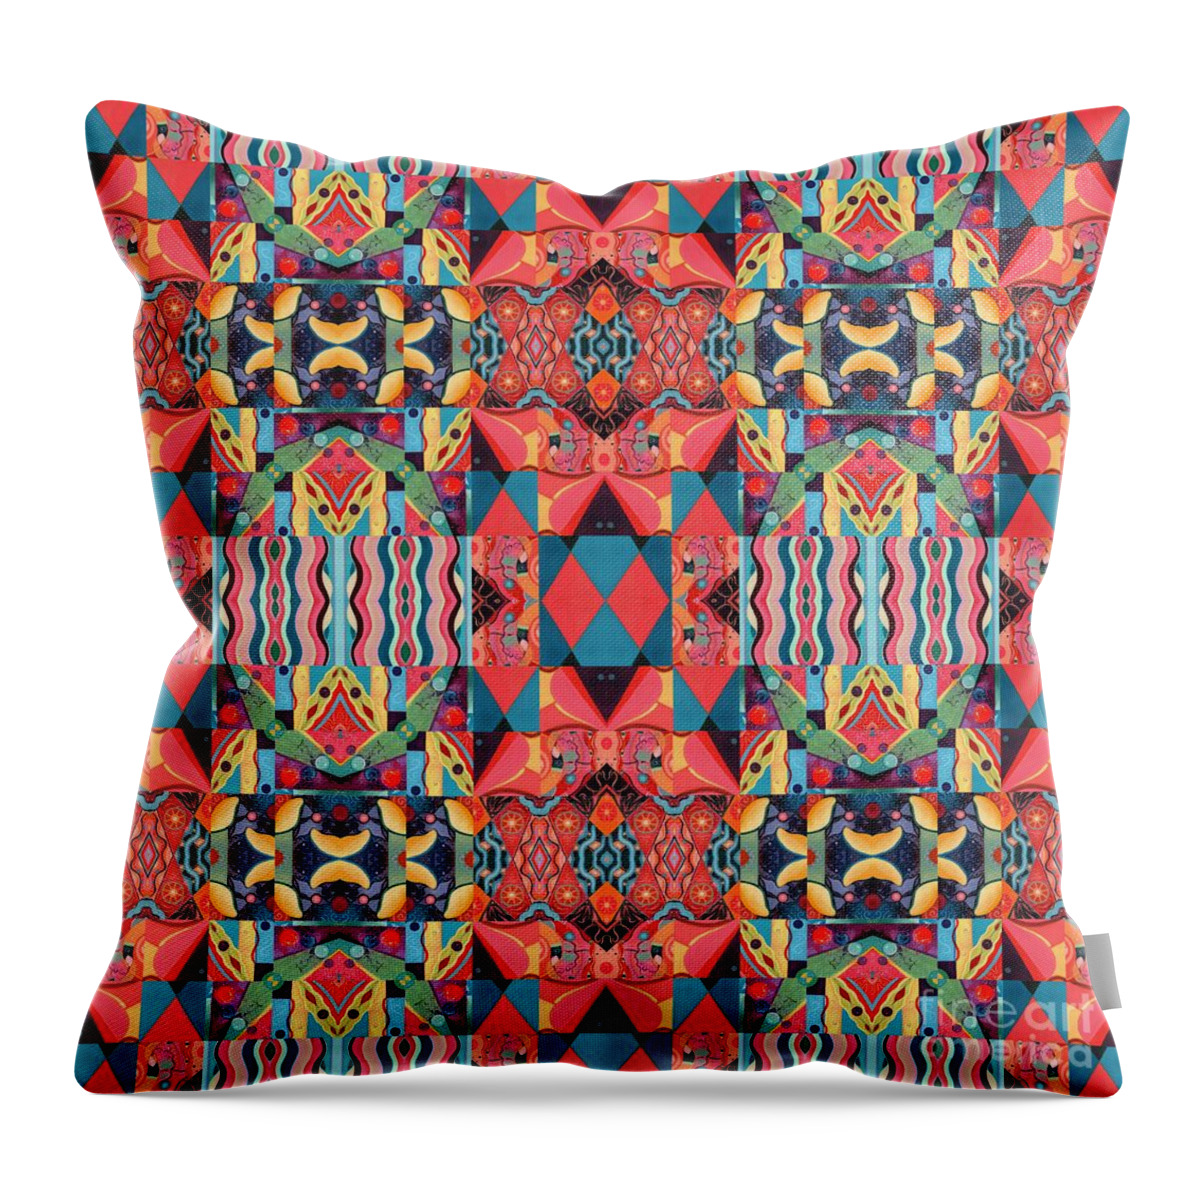 Tjod Mandala Series Puzzle 8 Arrangement 1 Multiplied By Helena Tiainen Throw Pillow featuring the mixed media T J O D Mandala Series Puzzle 8 Arrangement 1 Multiplied by Helena Tiainen